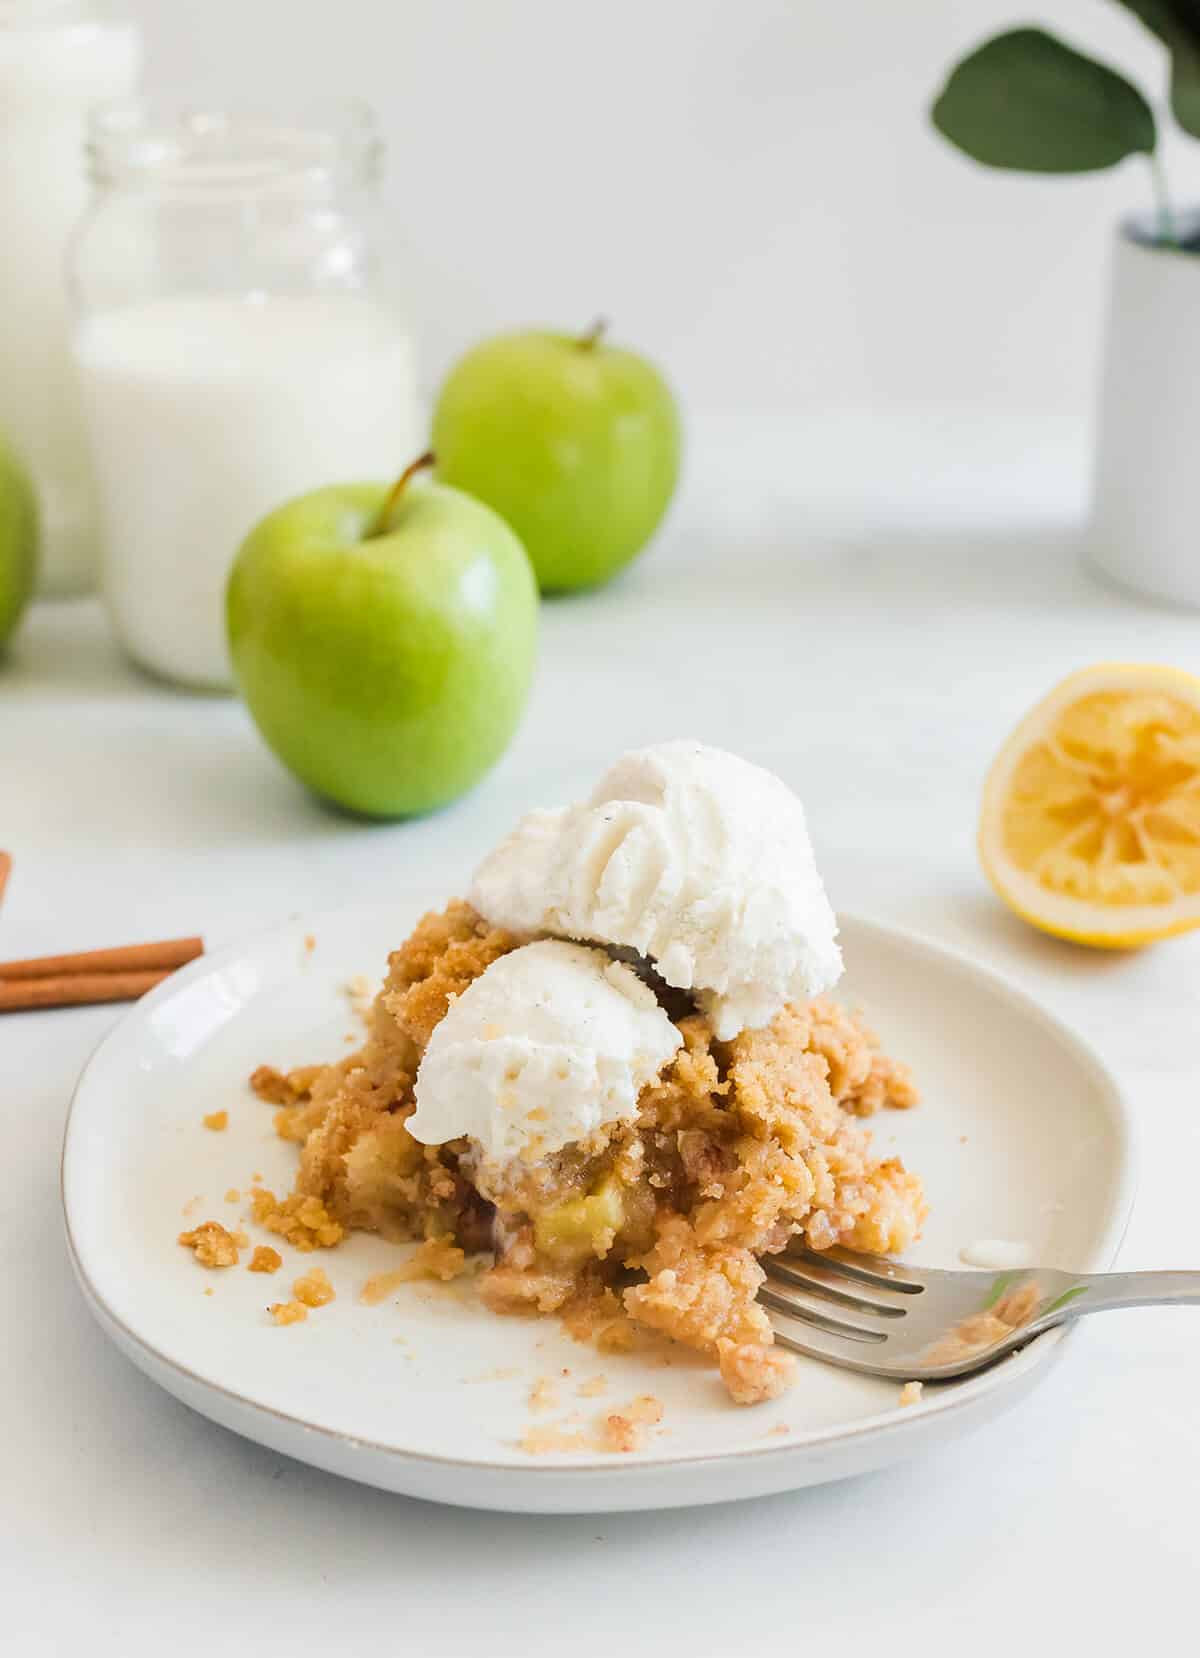 Serving of apple crisp without oats with vanilla ice cream.